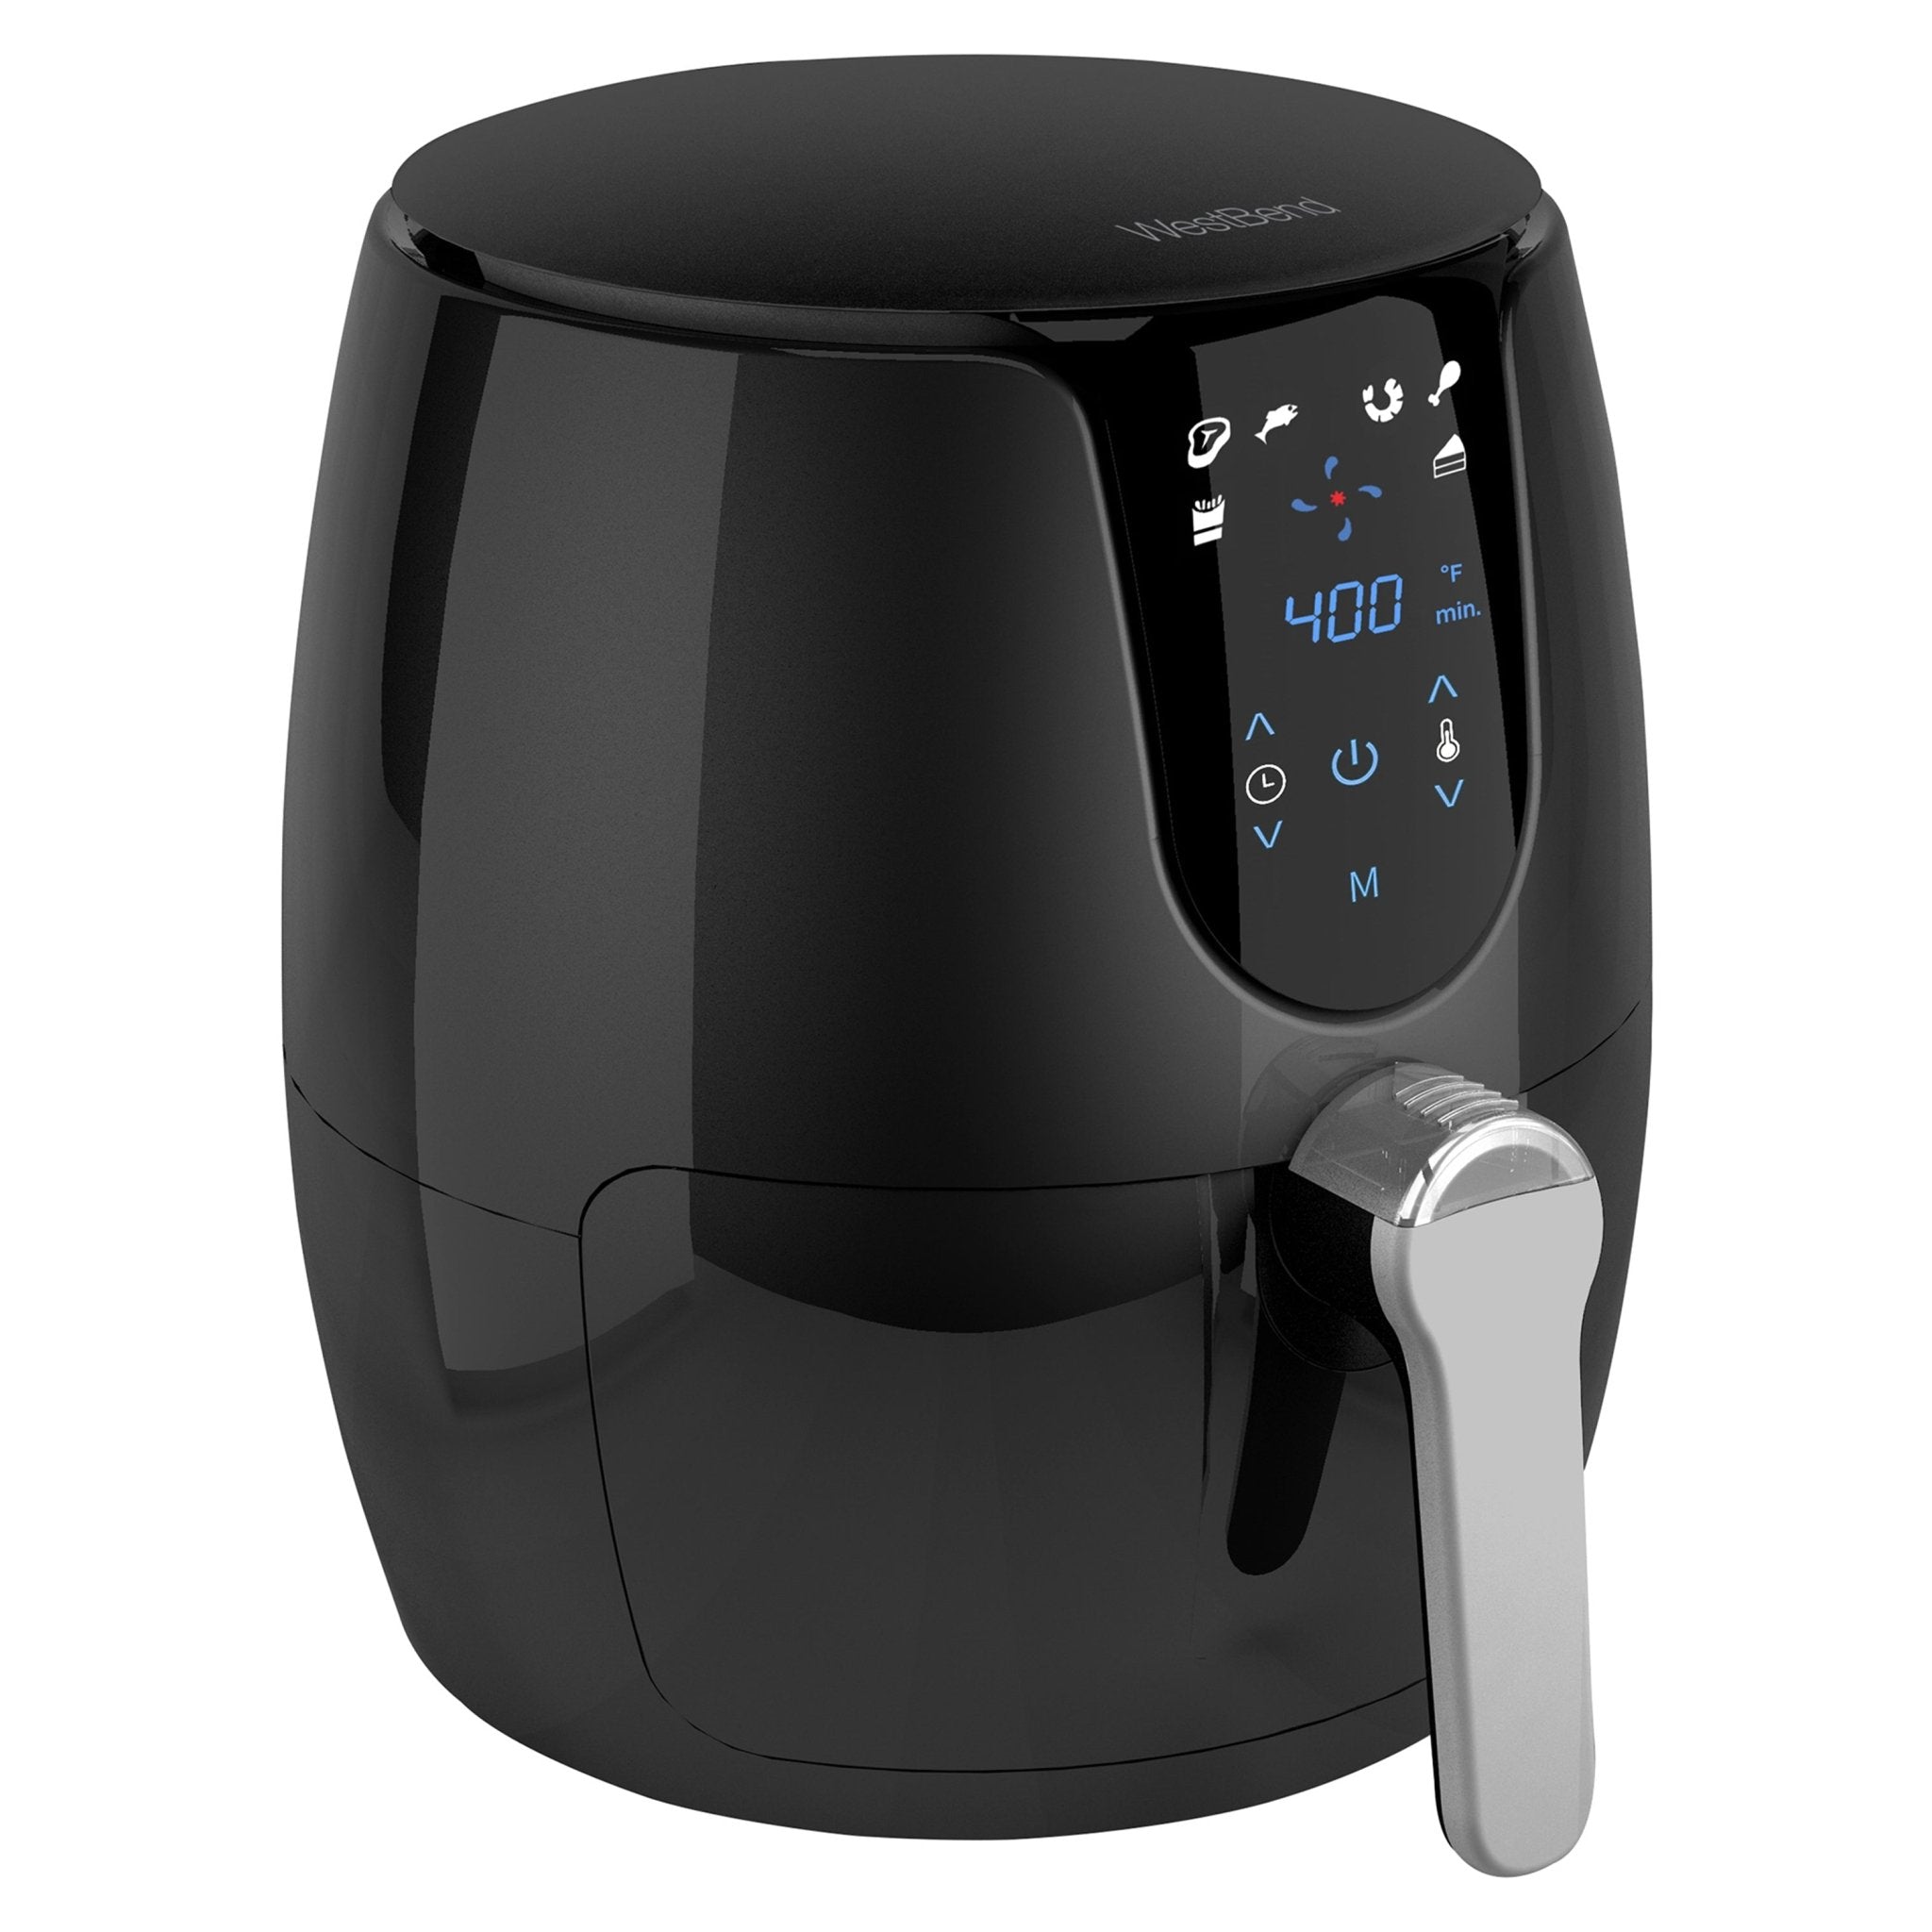 New House Kitchen Digital 3.5 Liter Air Fryer w/ Flat Basket, Touch Screen  AirFryer, Non-Stick Dishwasher-Safe Basket, Use Less Oil For Fast Healthier